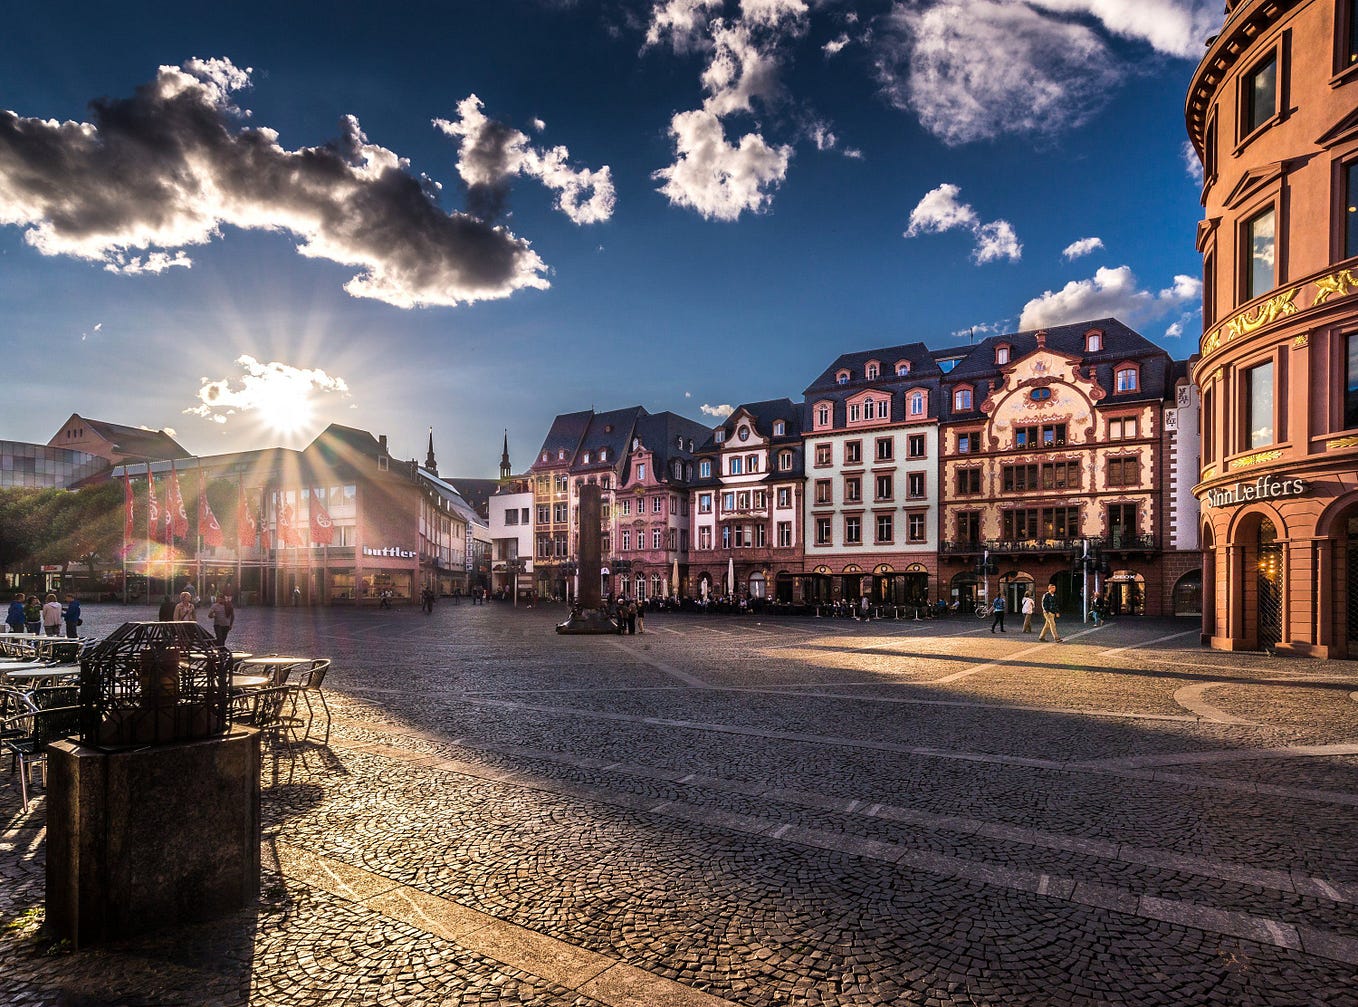 A photo of a plaza with cobblestone pavement and old-looking buildings with southern German architecture. The sun is low on the horizon with clearly distinct rays beaming across the square, creating long shadows on the pavement.